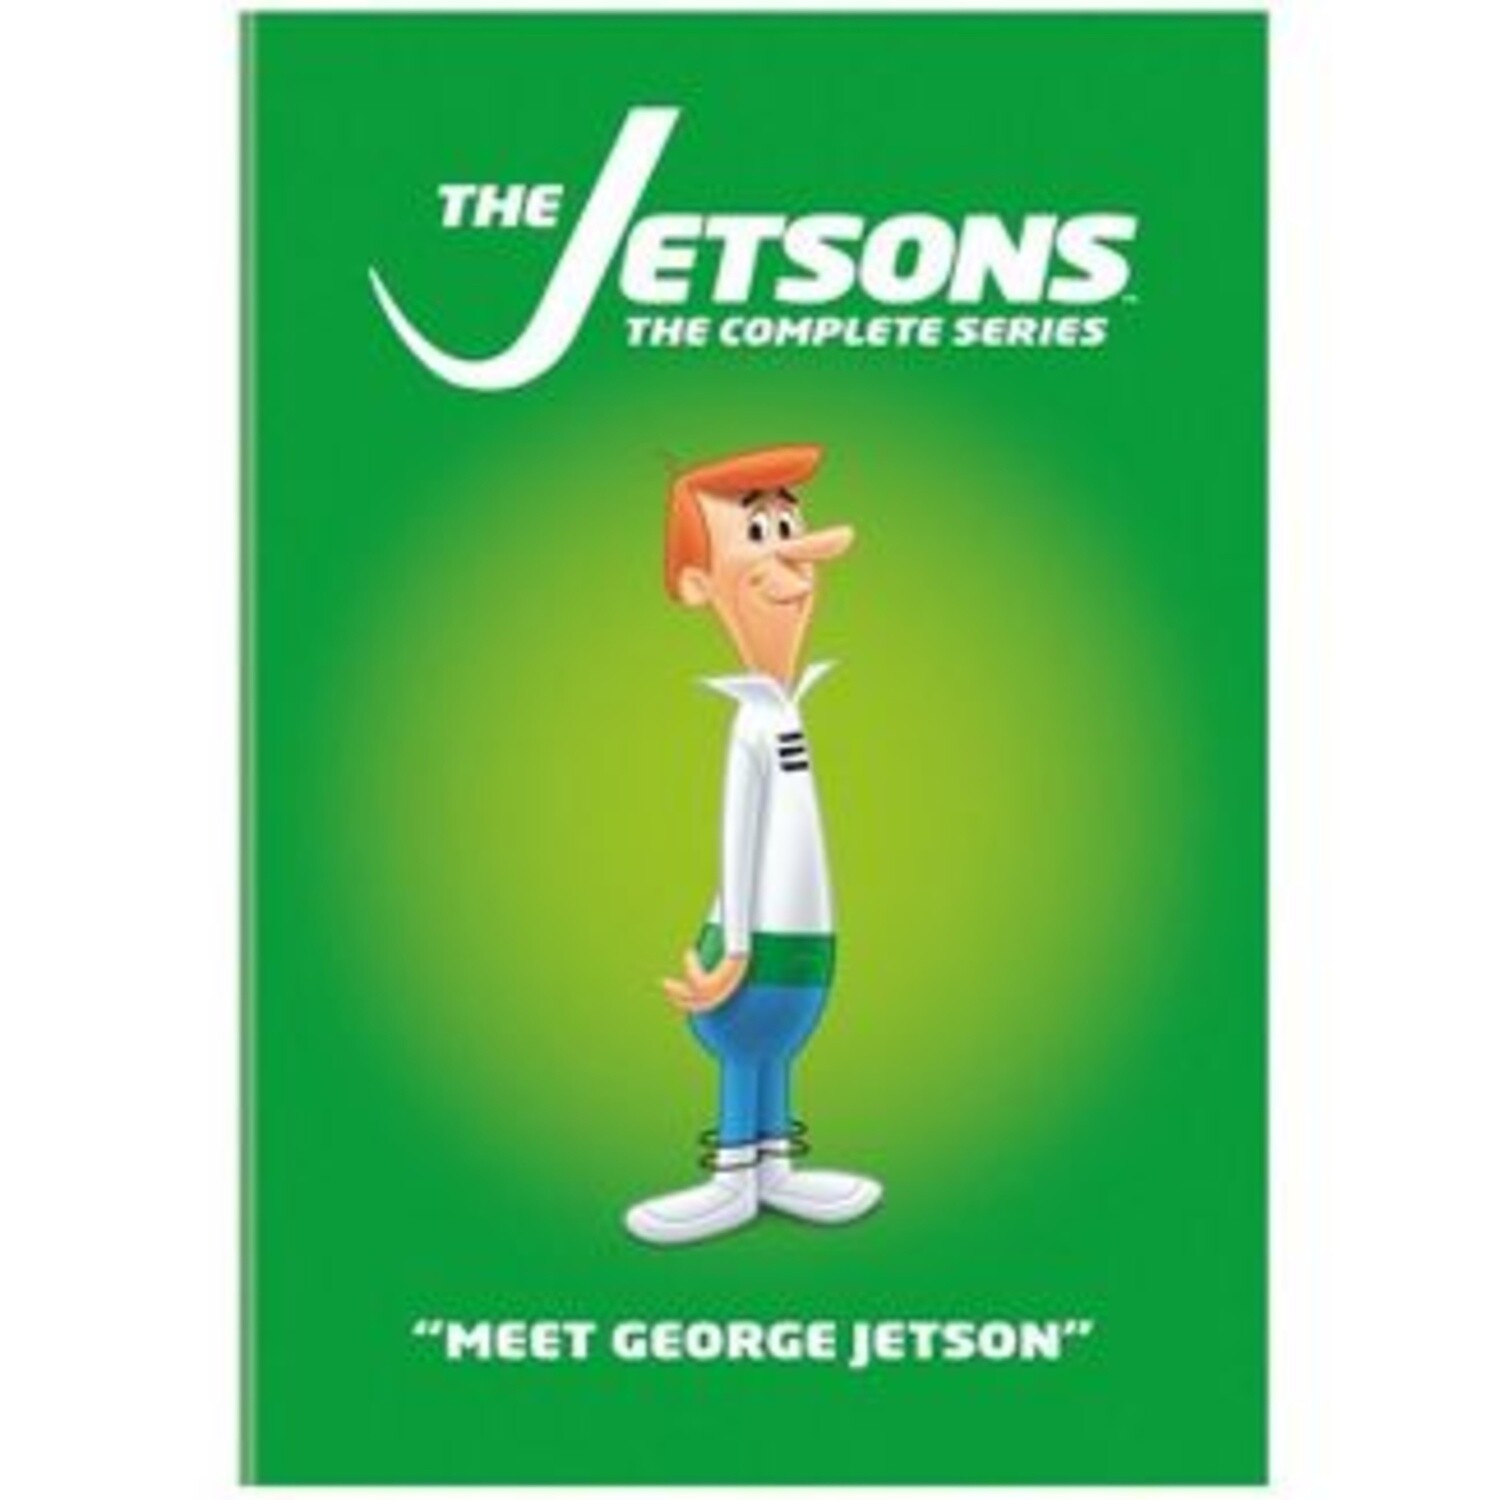 Jetsons, The (Complete Series) 7 Day DVD Rental